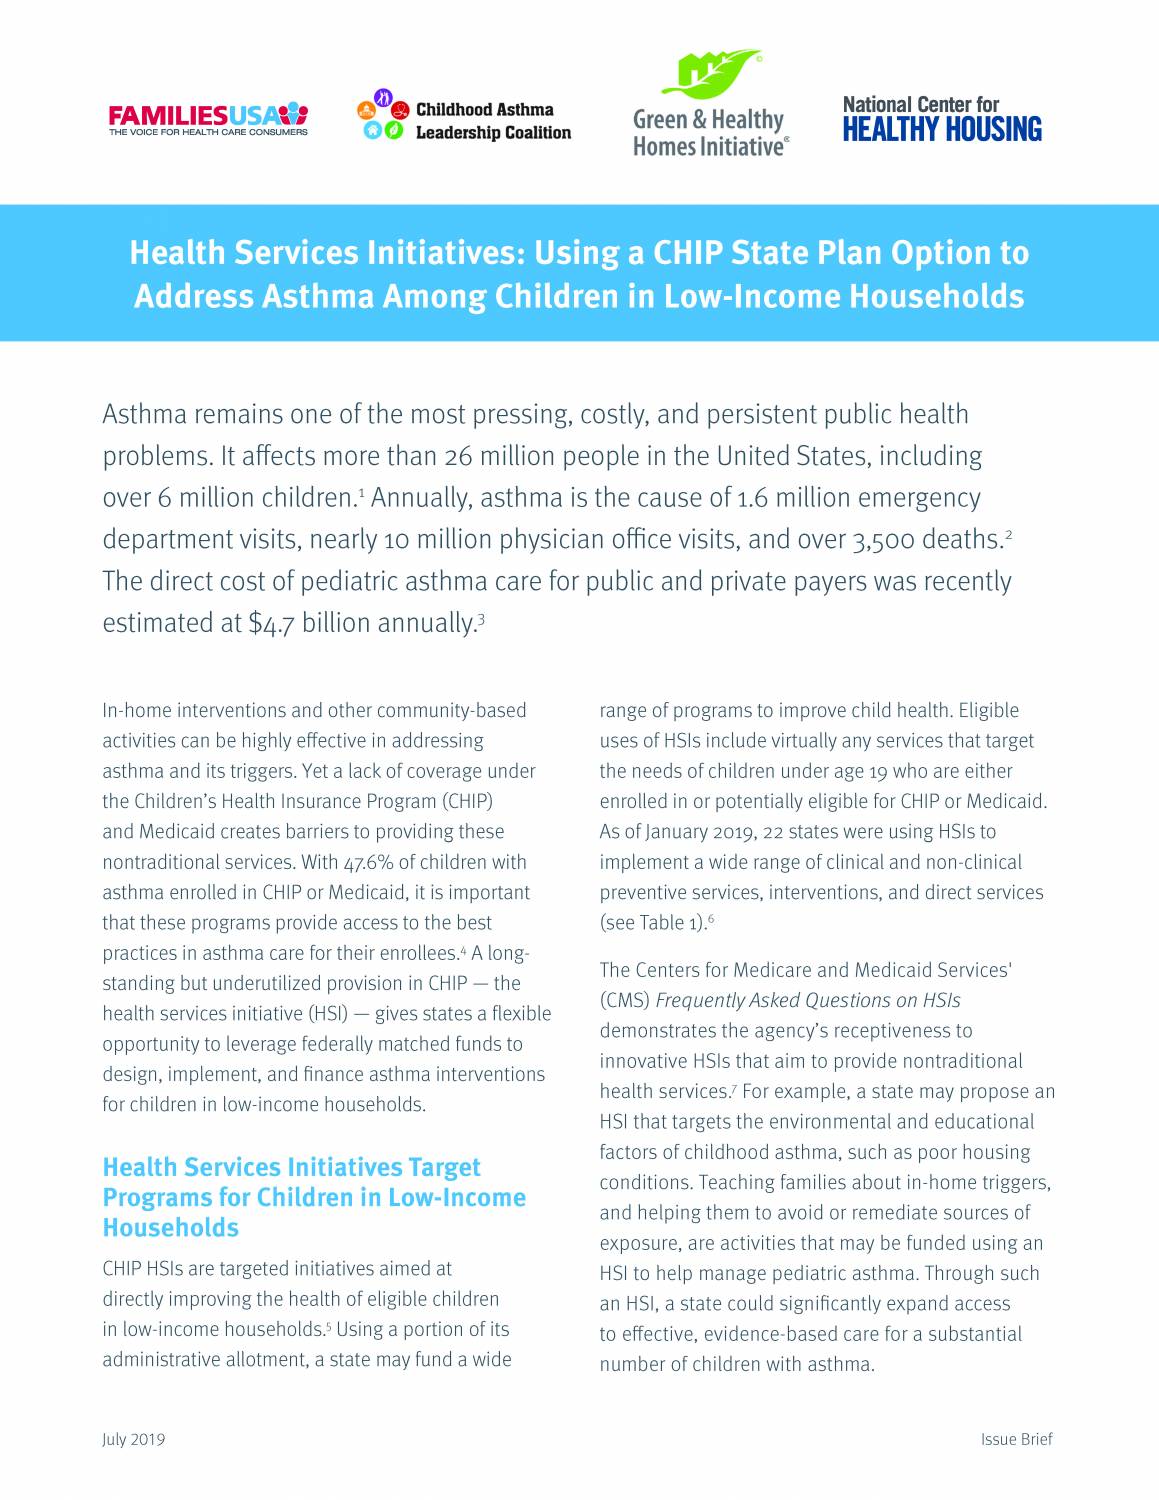 Technical Brief: Health Services Initiatives: Using a CHIP State Plan Option to Address Asthma among Children in Low-Income Households